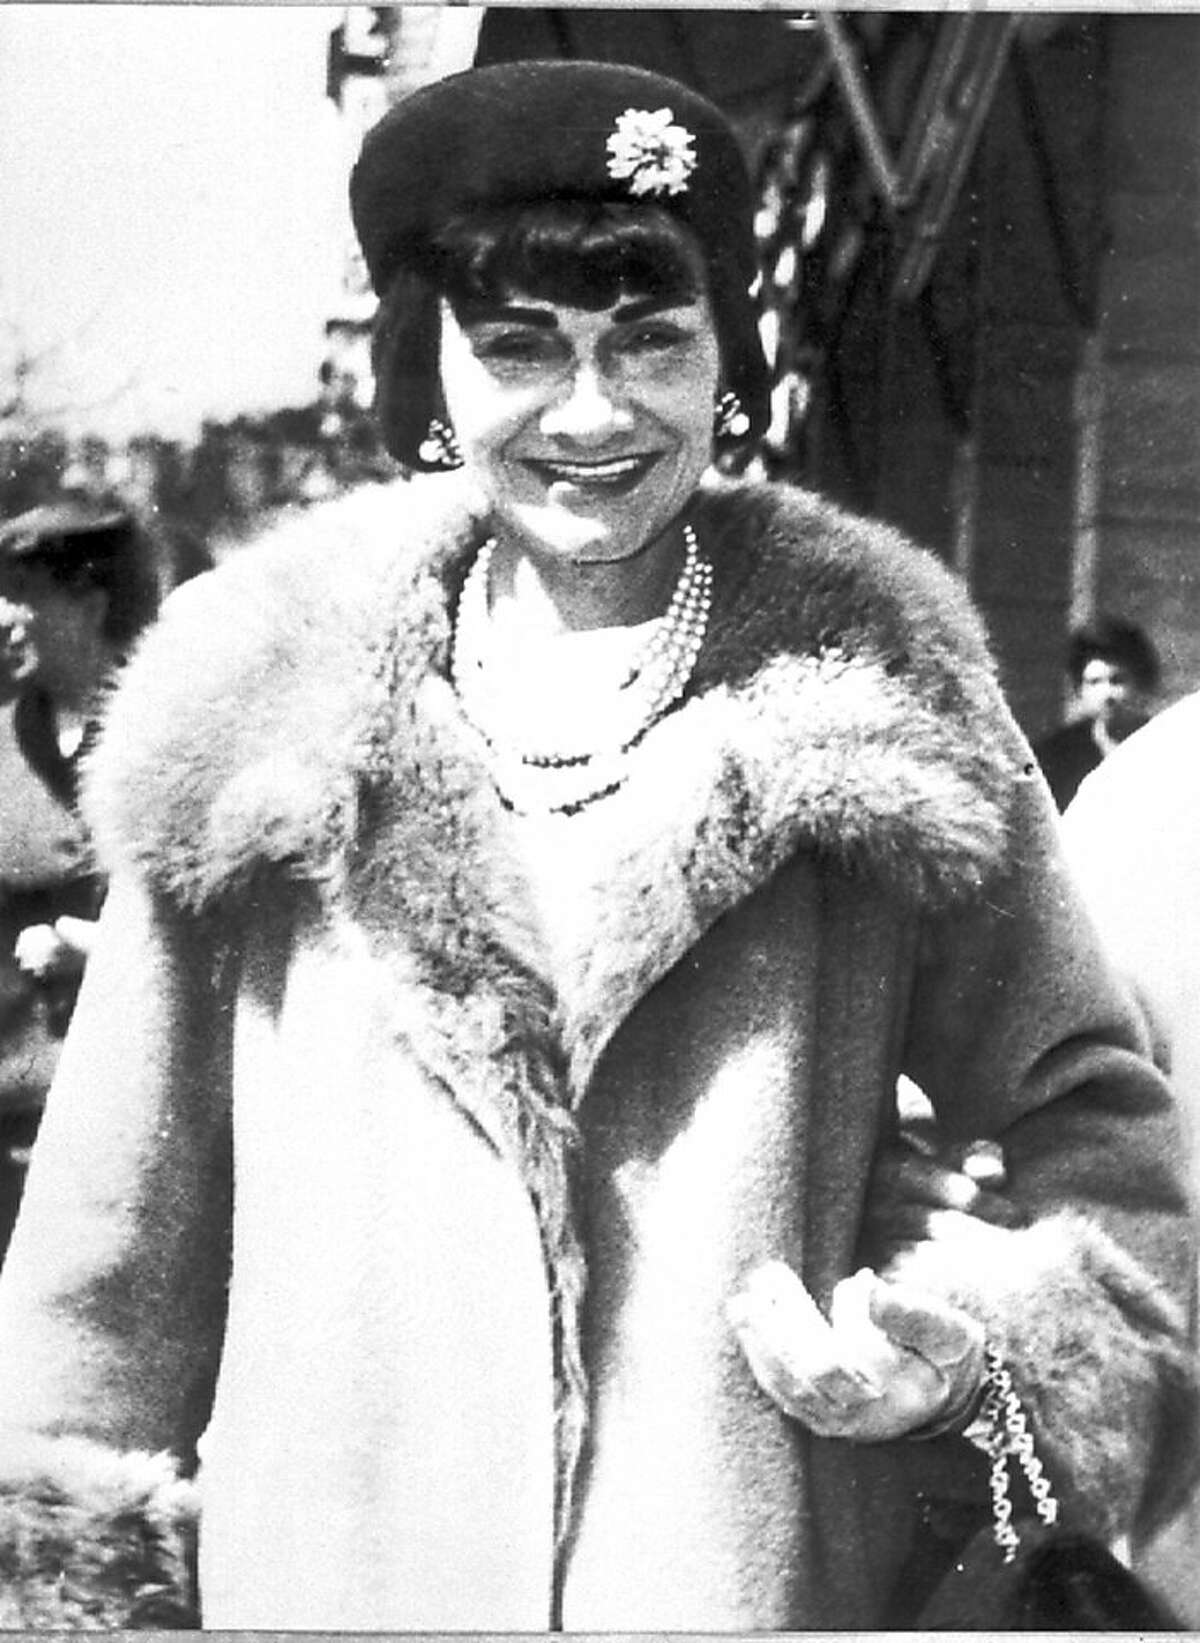 French fashion designer Gabrielle "Coco" Chanel is shown in this undated photo. (AP Photo) Ran on: 04-22-2008 Gabrielle Coco Chanel, French icon of fashion and flair. Ran on: 09-13-2008 Shirley MacLaine stars as the older Coco Chanel making a comeback in 1954 in Lifetime Networks biopic Coco Chanel. Ran on: 03-01-2009 The apartment of the late designer Coco Chanel will play a role in Willie Browns 75th birthday party.